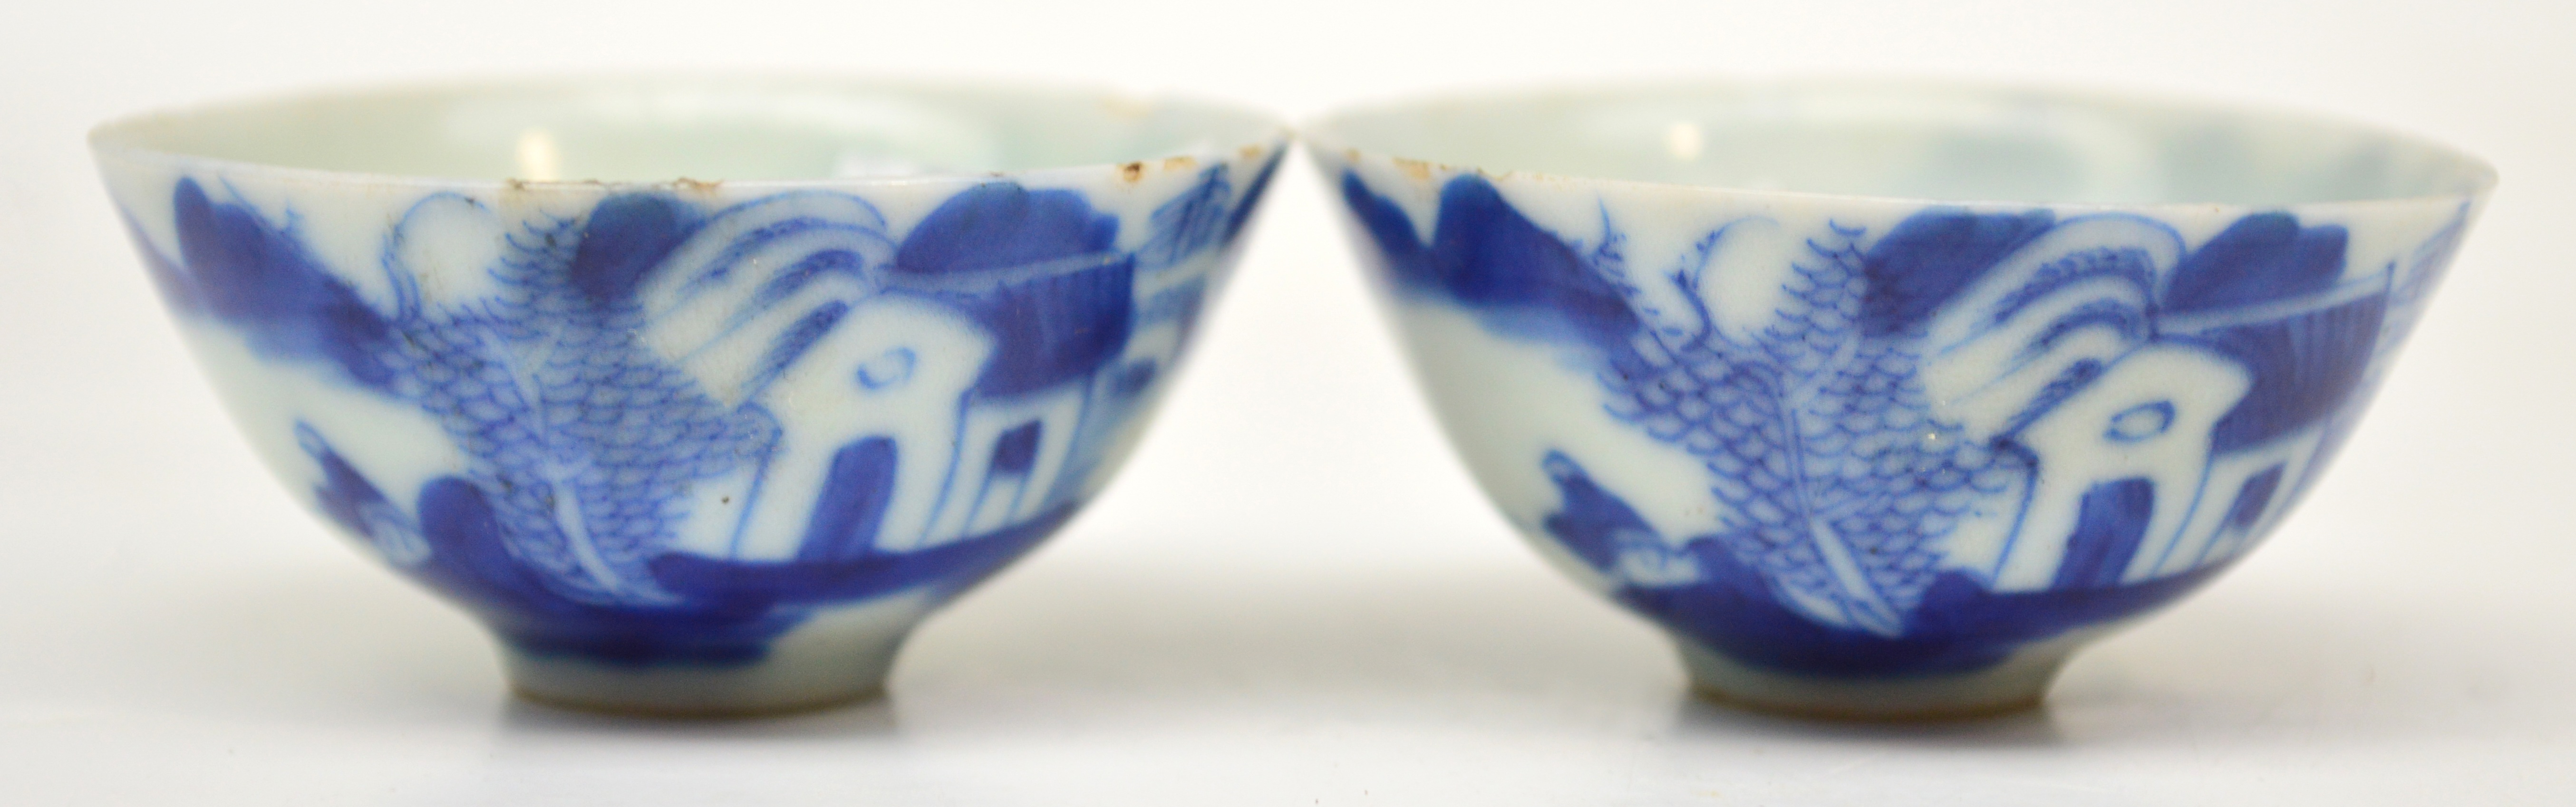 A pair of Chinese Qianlong period porcelain tea bowls painted in underglaze blue with a continuous